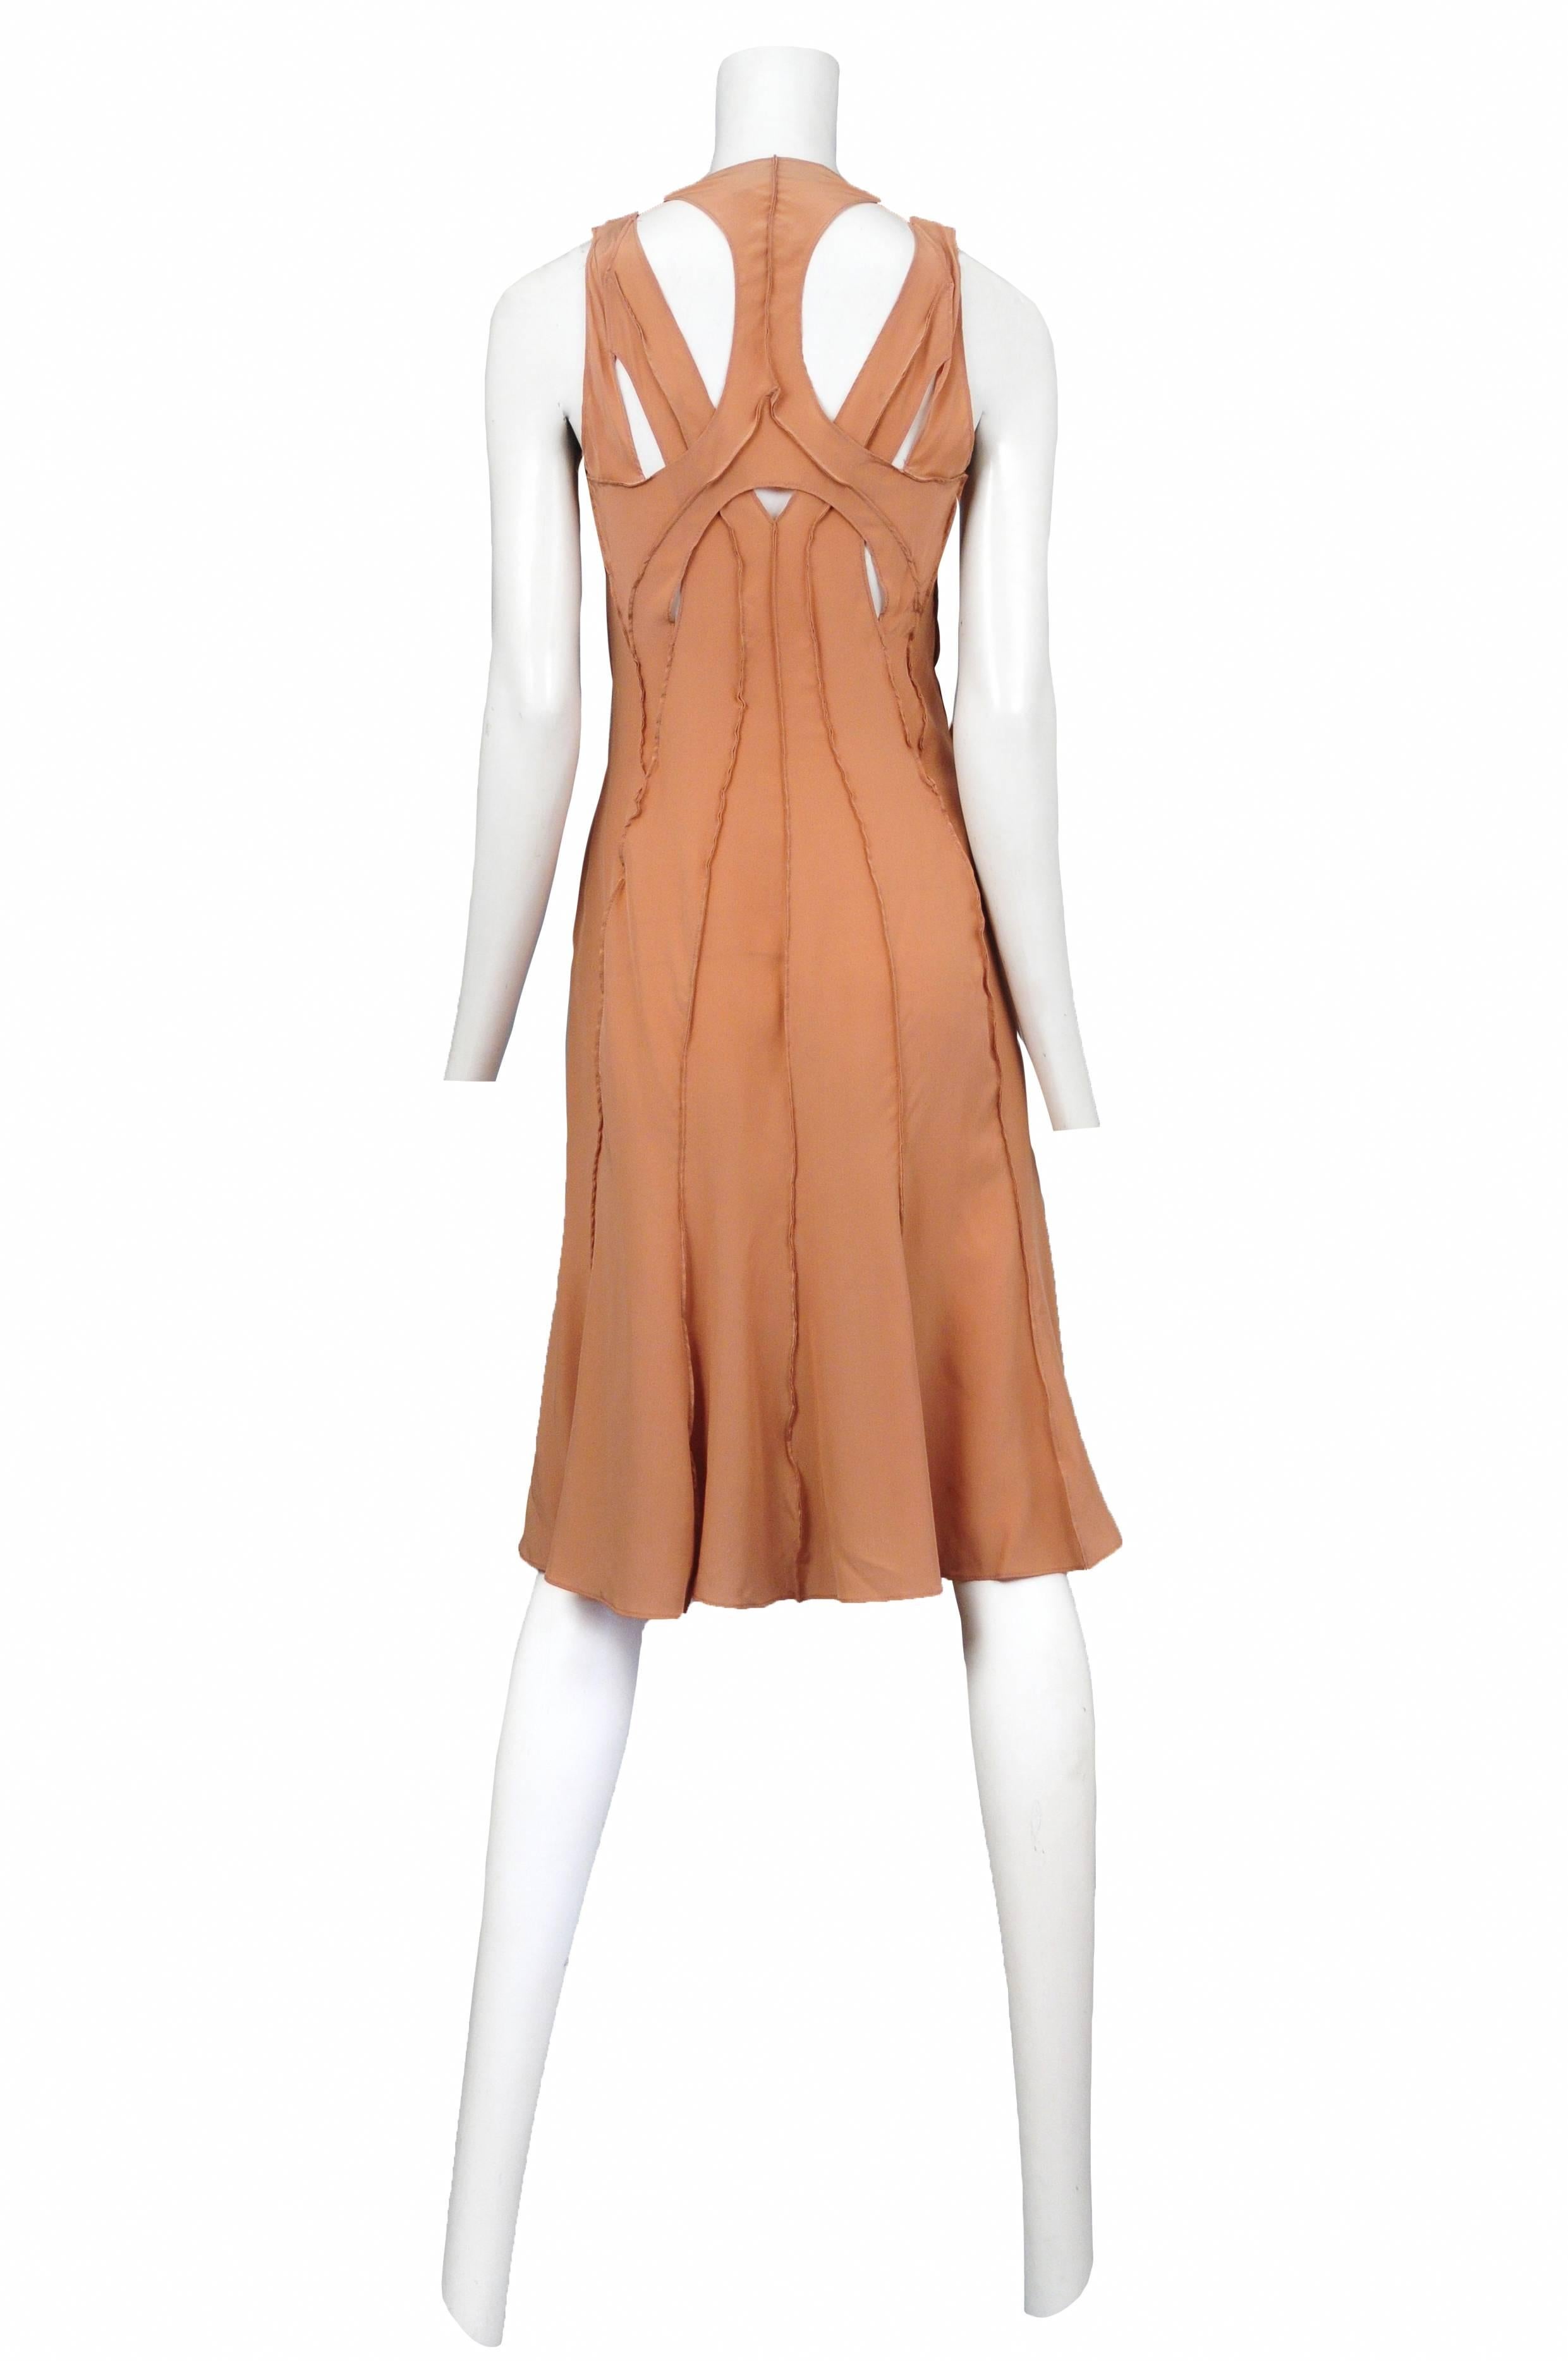 Vintage Tom Ford for Yves Saint Laurent peach silk sleeveless cocktail dress featuring cutouts, exposed seam detailing throughout and a large fabric rosette at the center chest. Runway piece from the Spring Summer 2003 Collection.